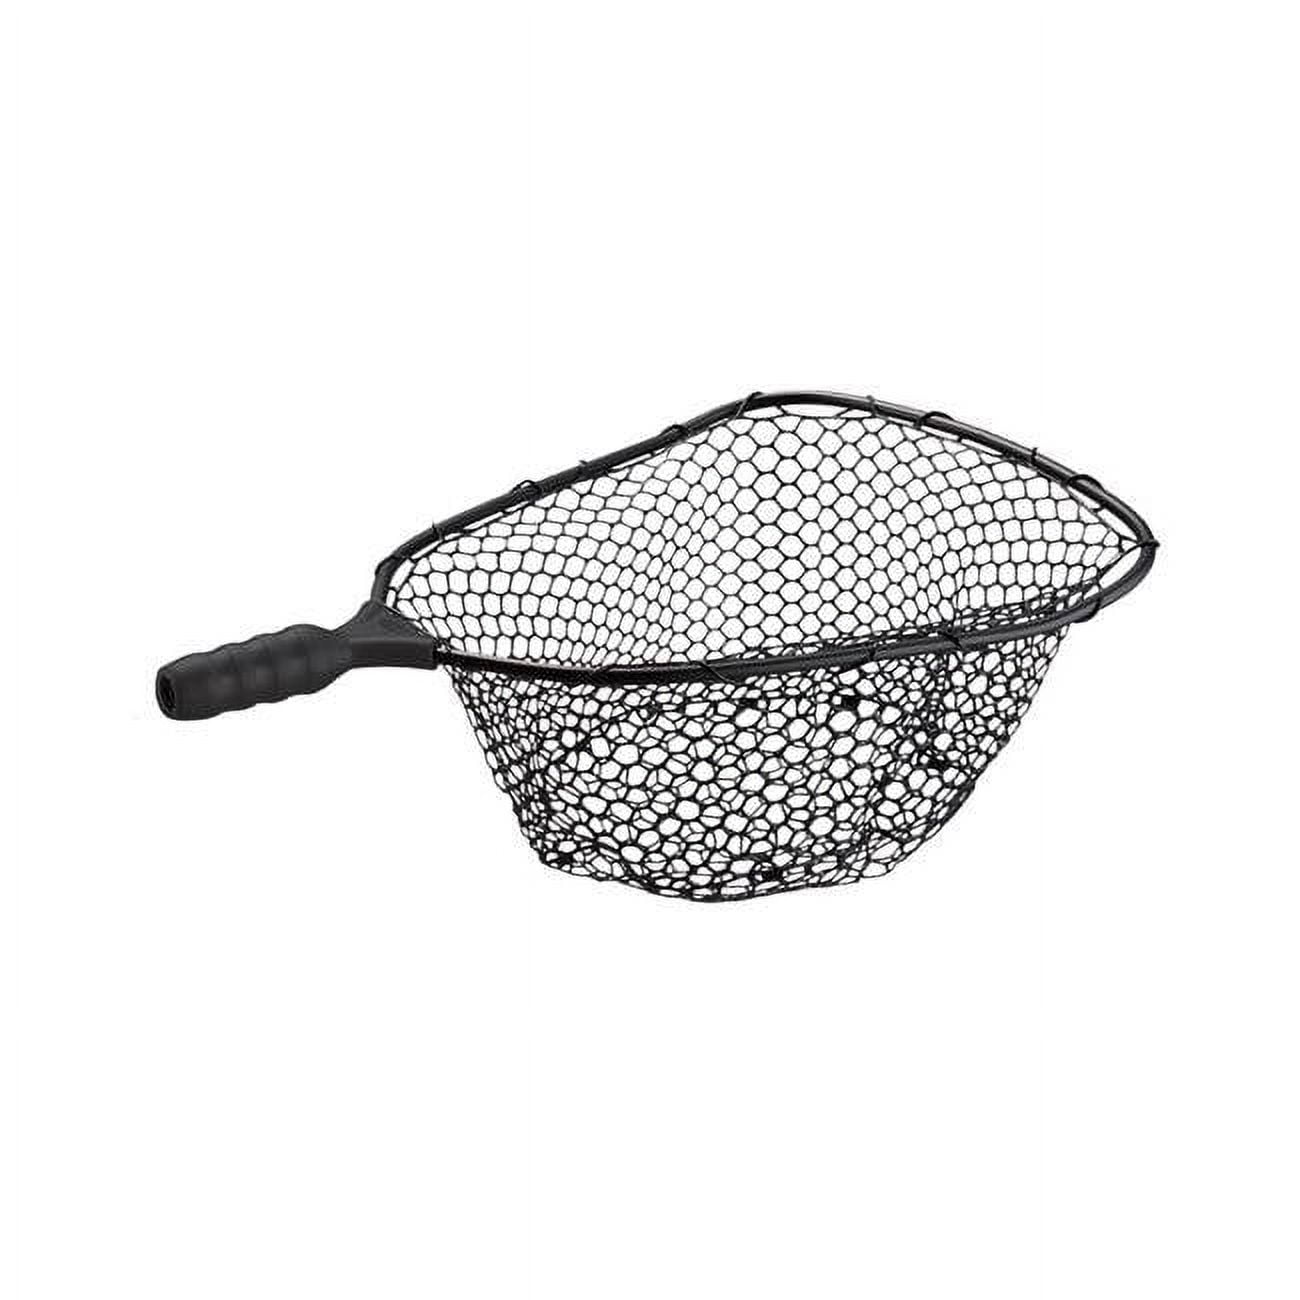 Adventure Products 72051a 19 In. Ego S2 Rubber Net Head, Large